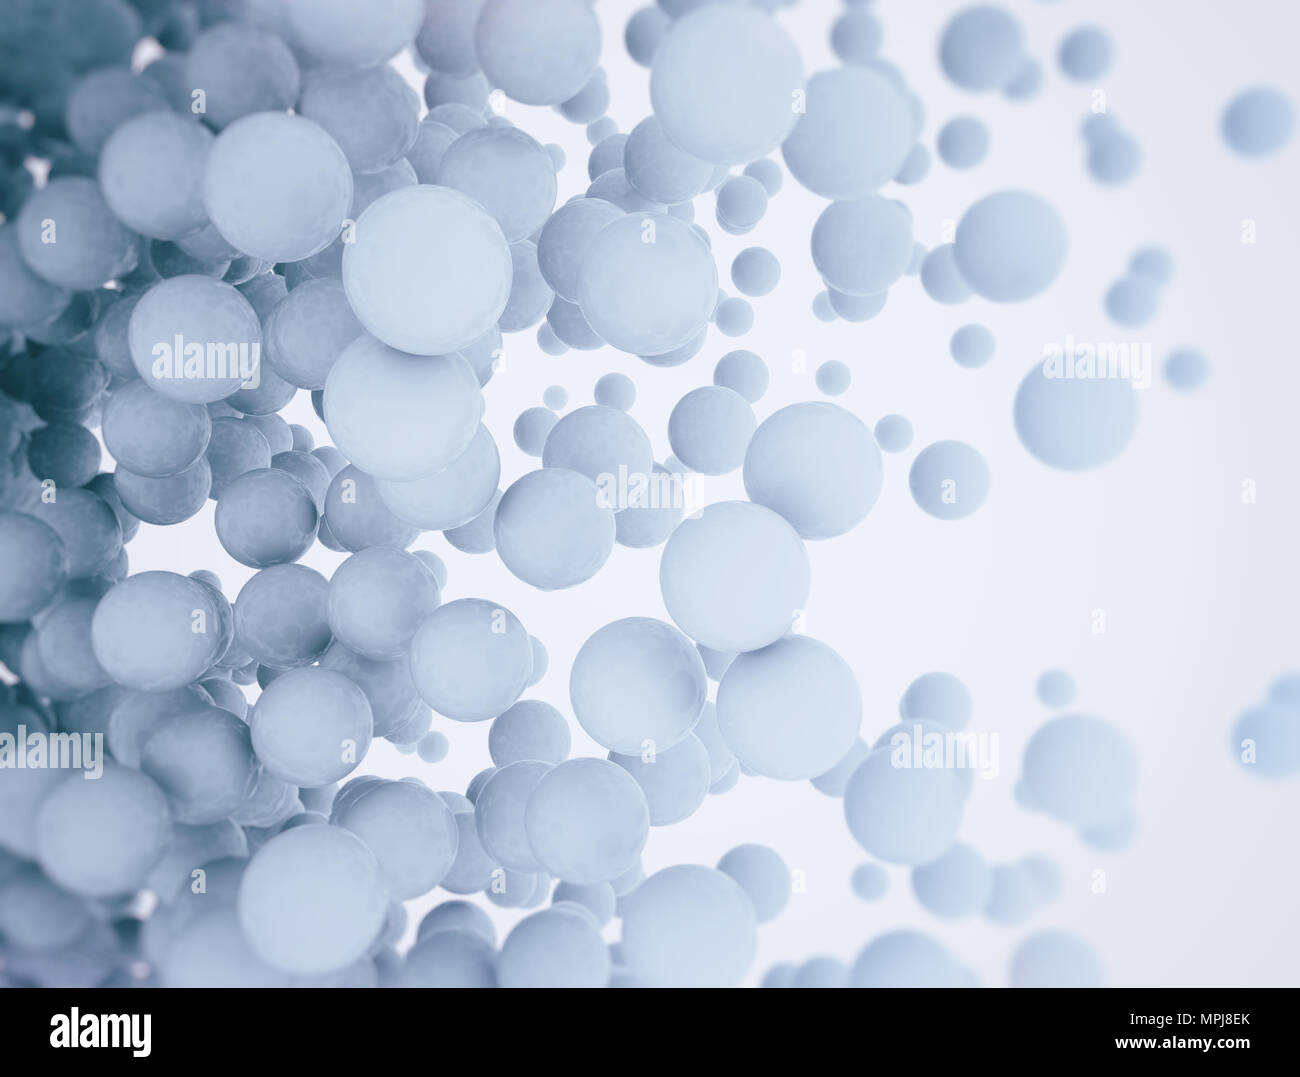 Abstract floating blue spheres on white background Stock Photo